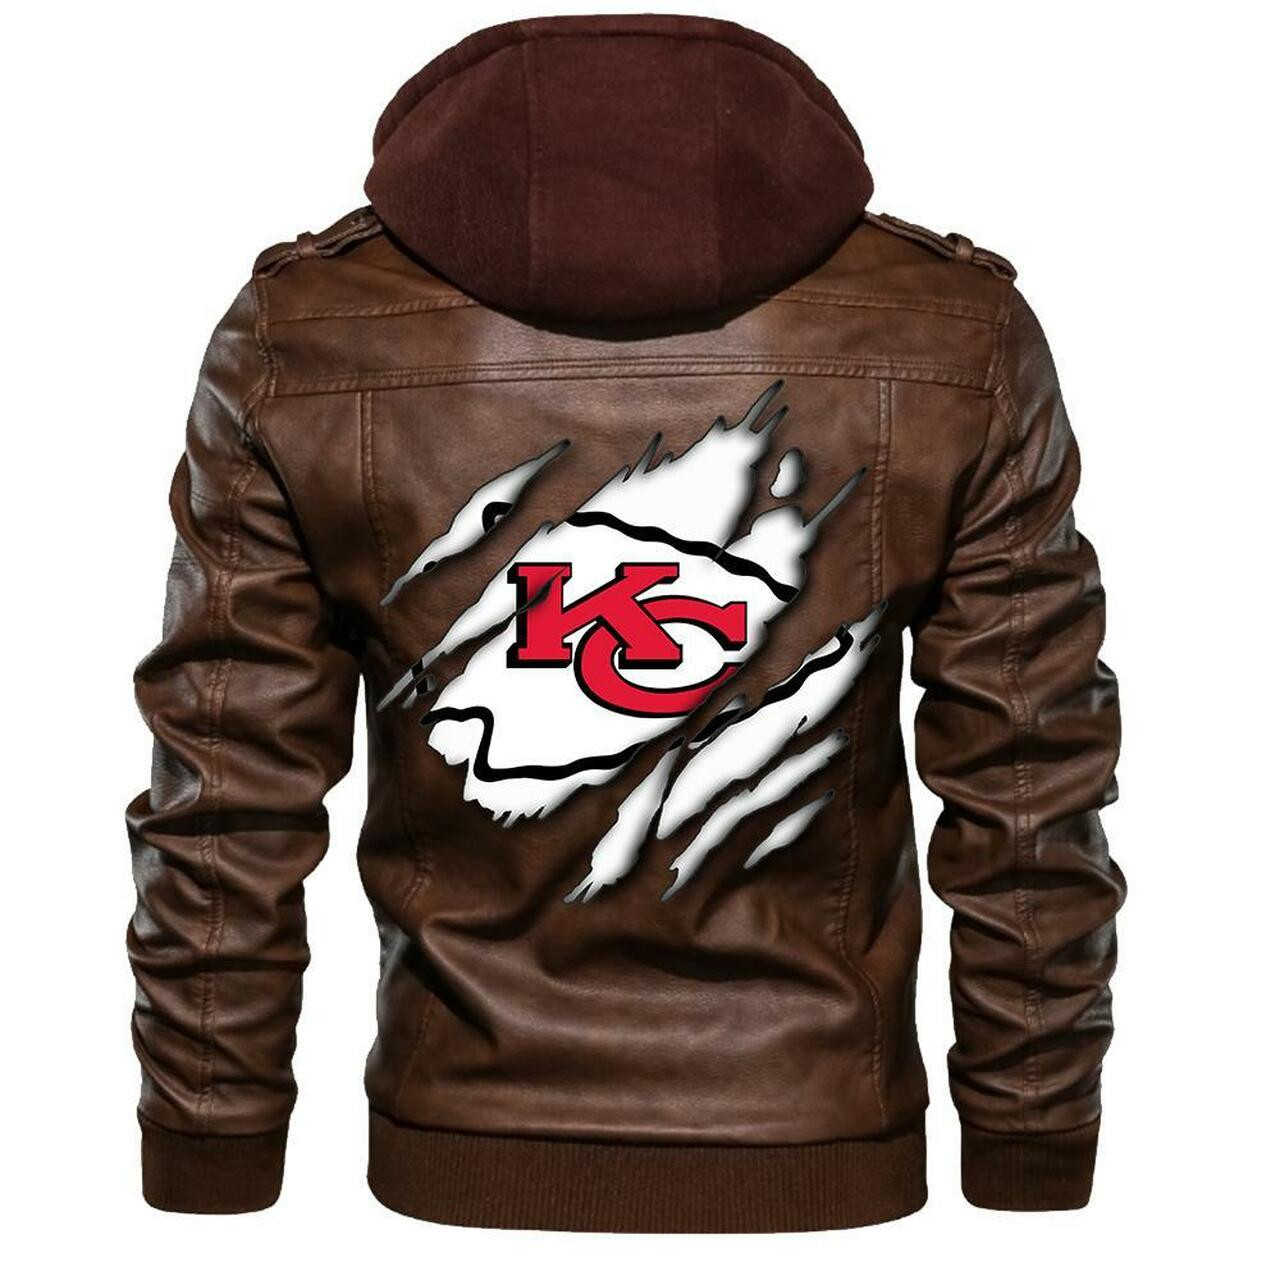 This leather Jacket will look great on you and make you stand out from the crowd 299